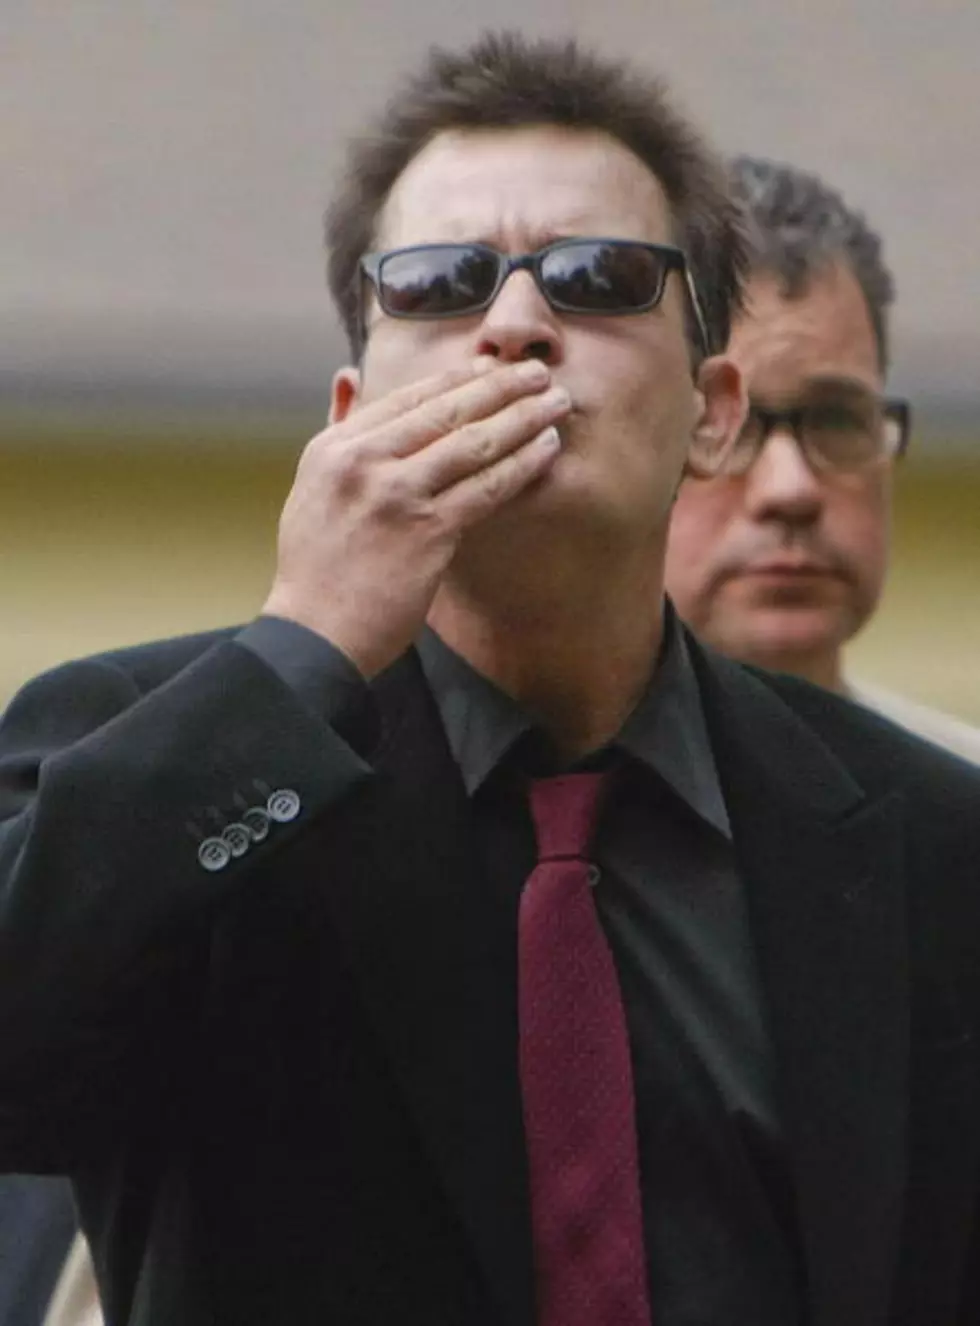 Charlie Sheen Is Still Making The TV Rounds Today [Video]